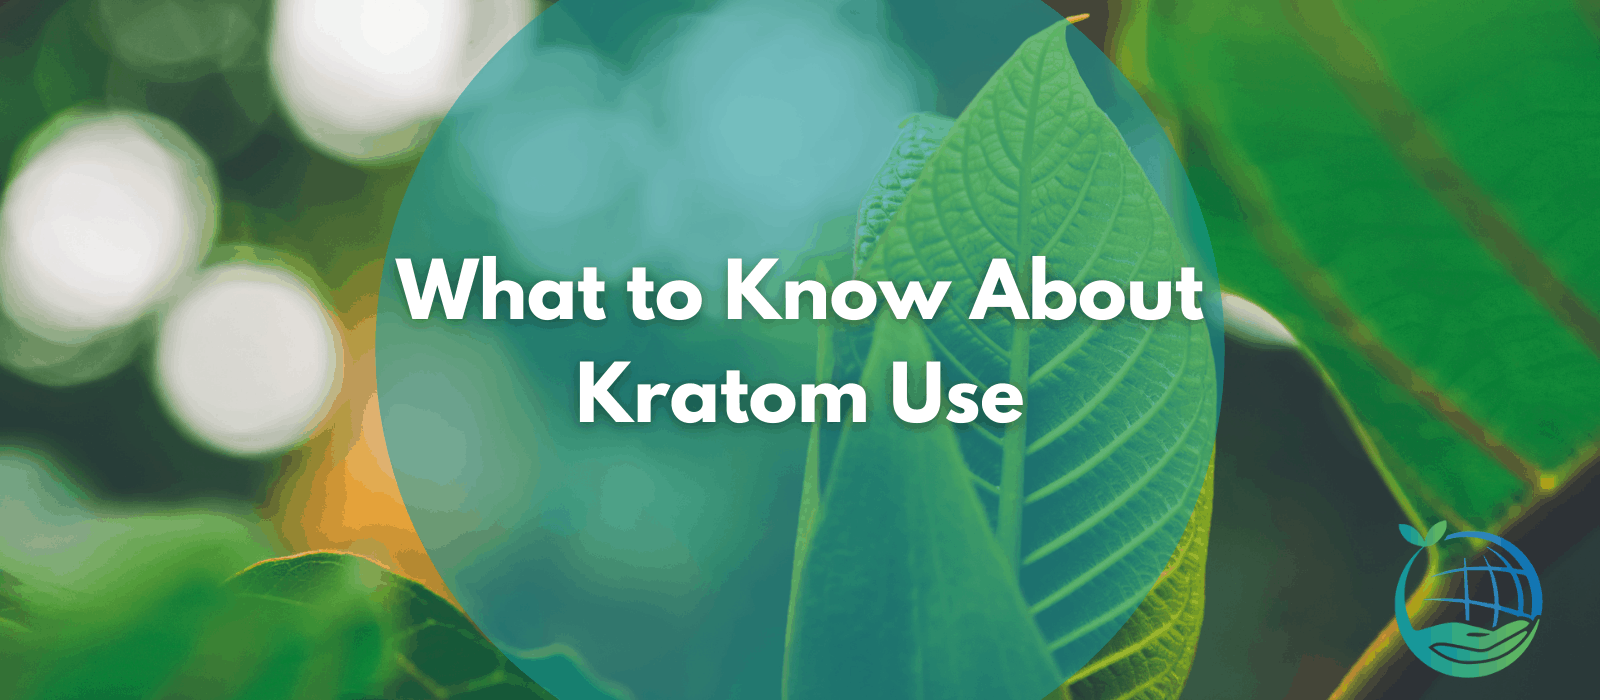 What to Know About Kratom Use